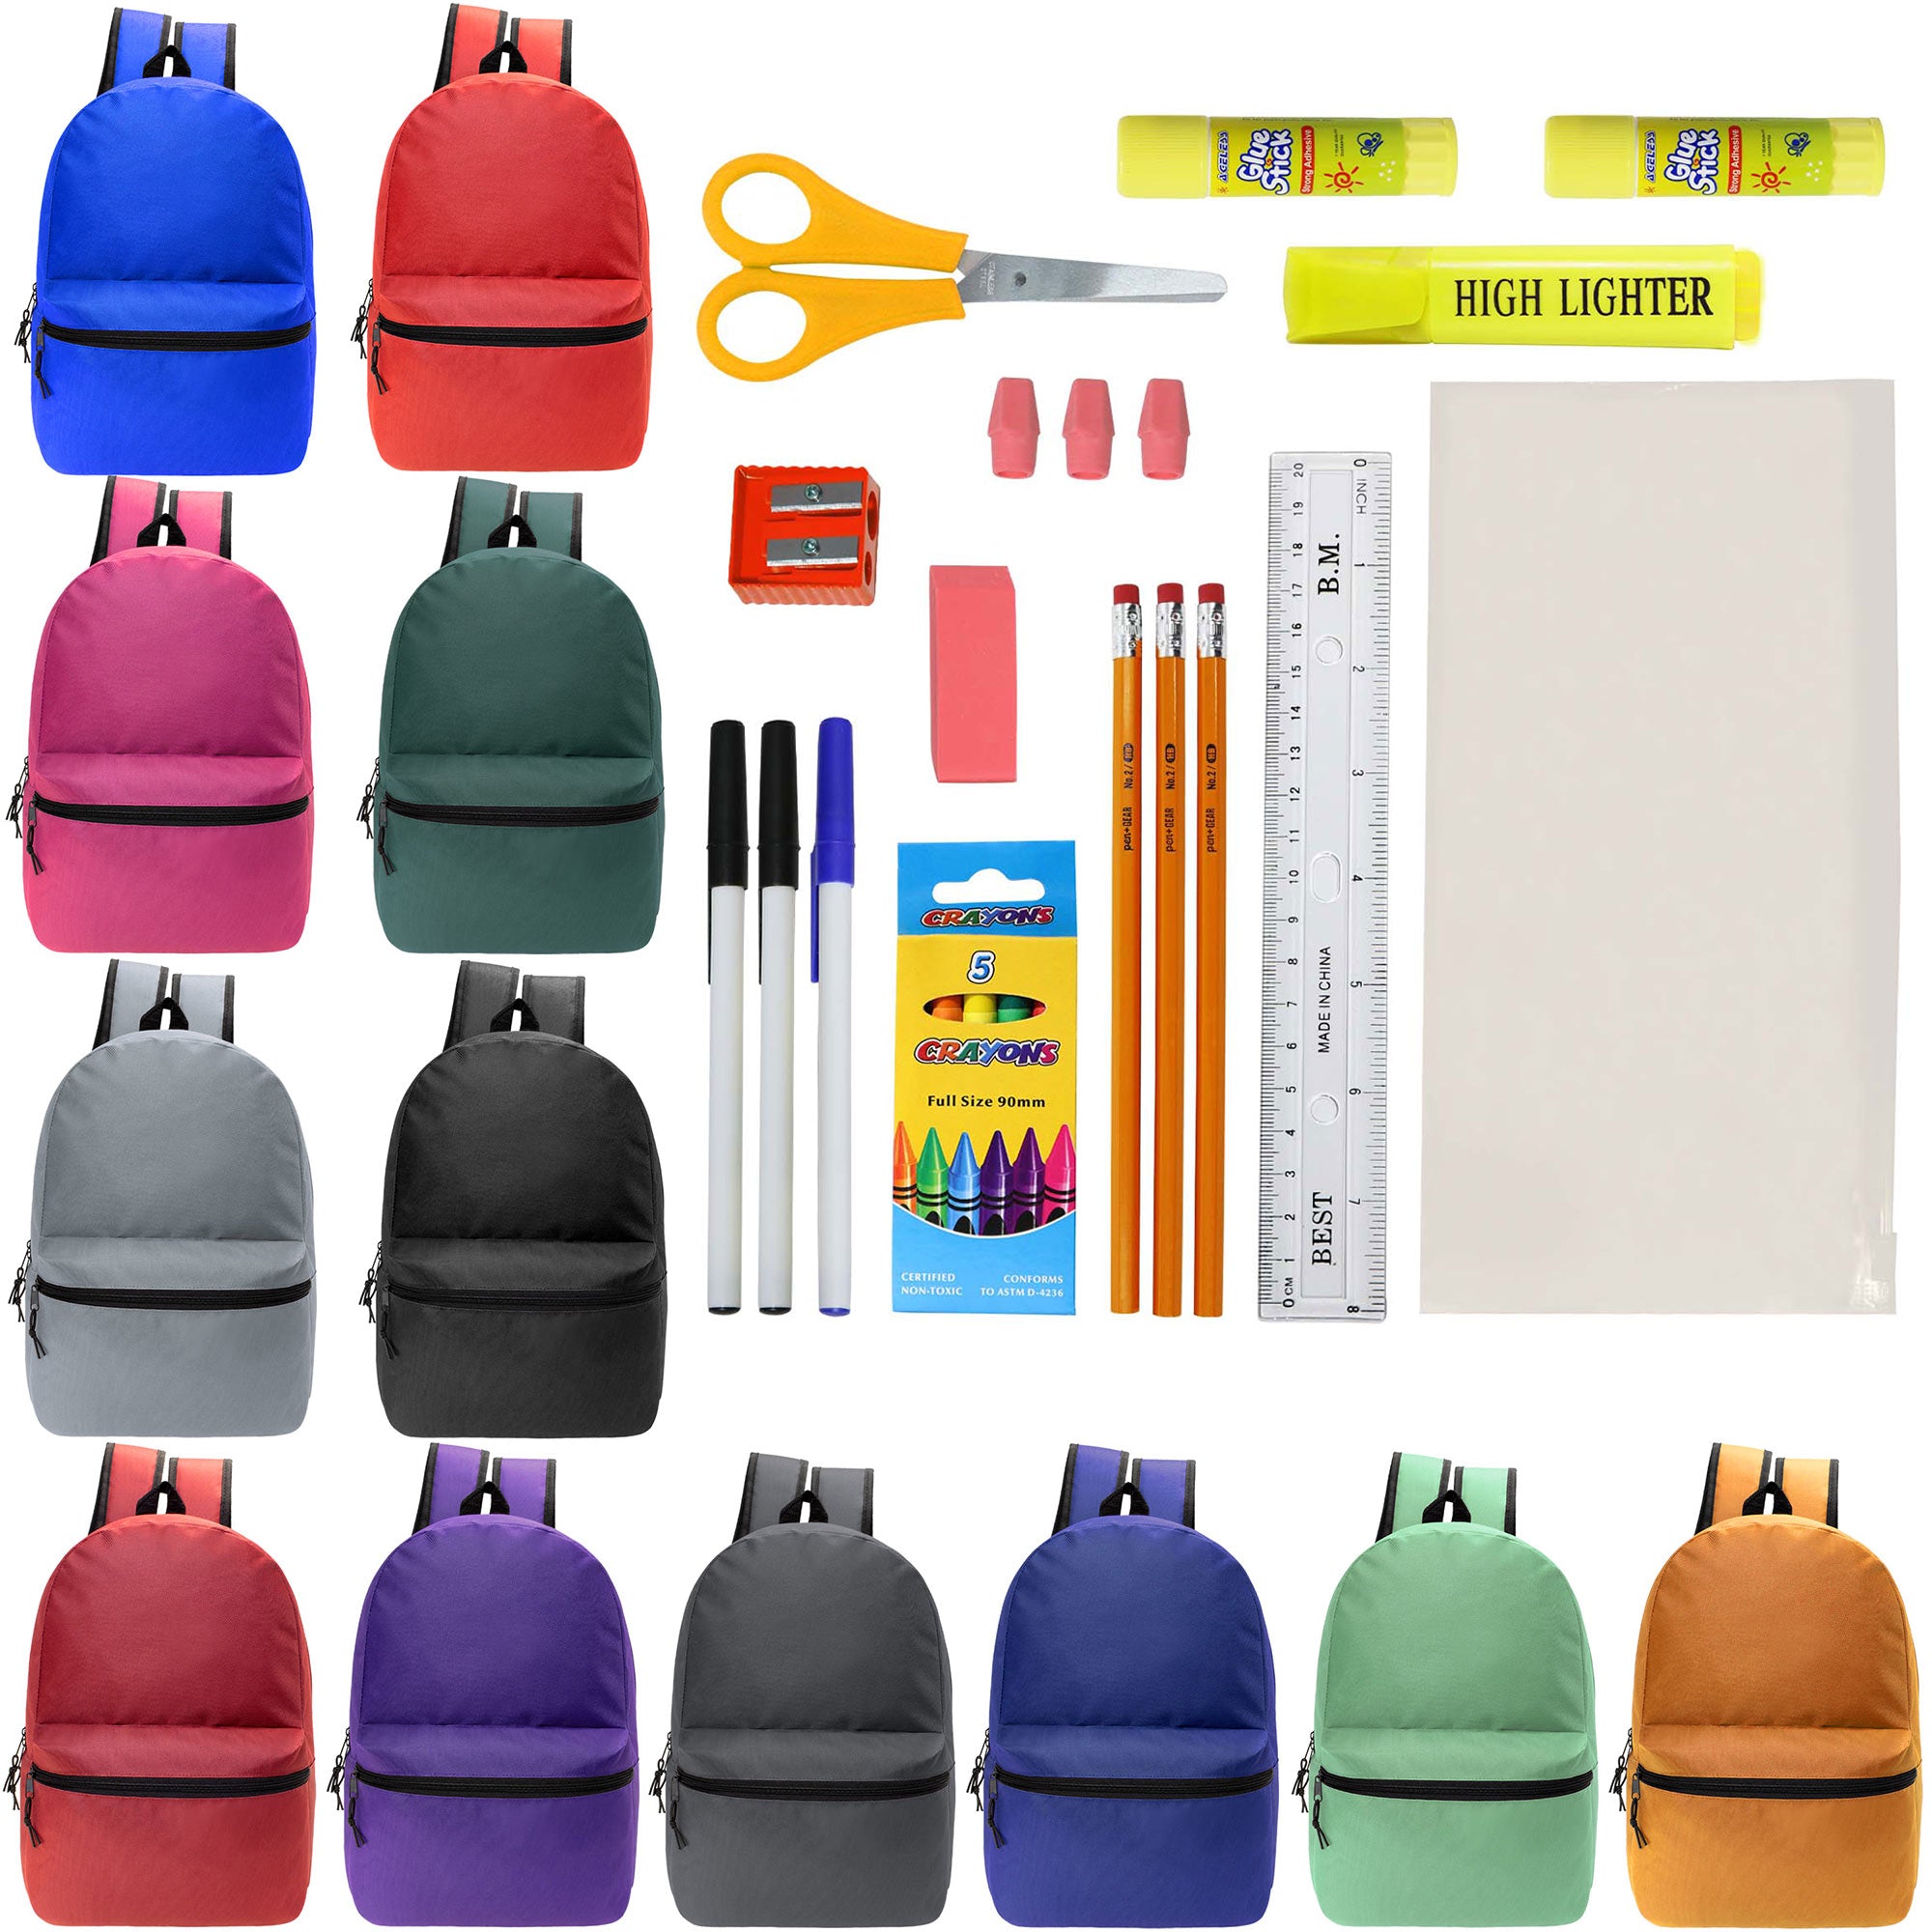 12 Wholesale Blank 18.5" Backpacks in 12 Assorted Colors and 12 Bulk School Supply Kits of Your Choice